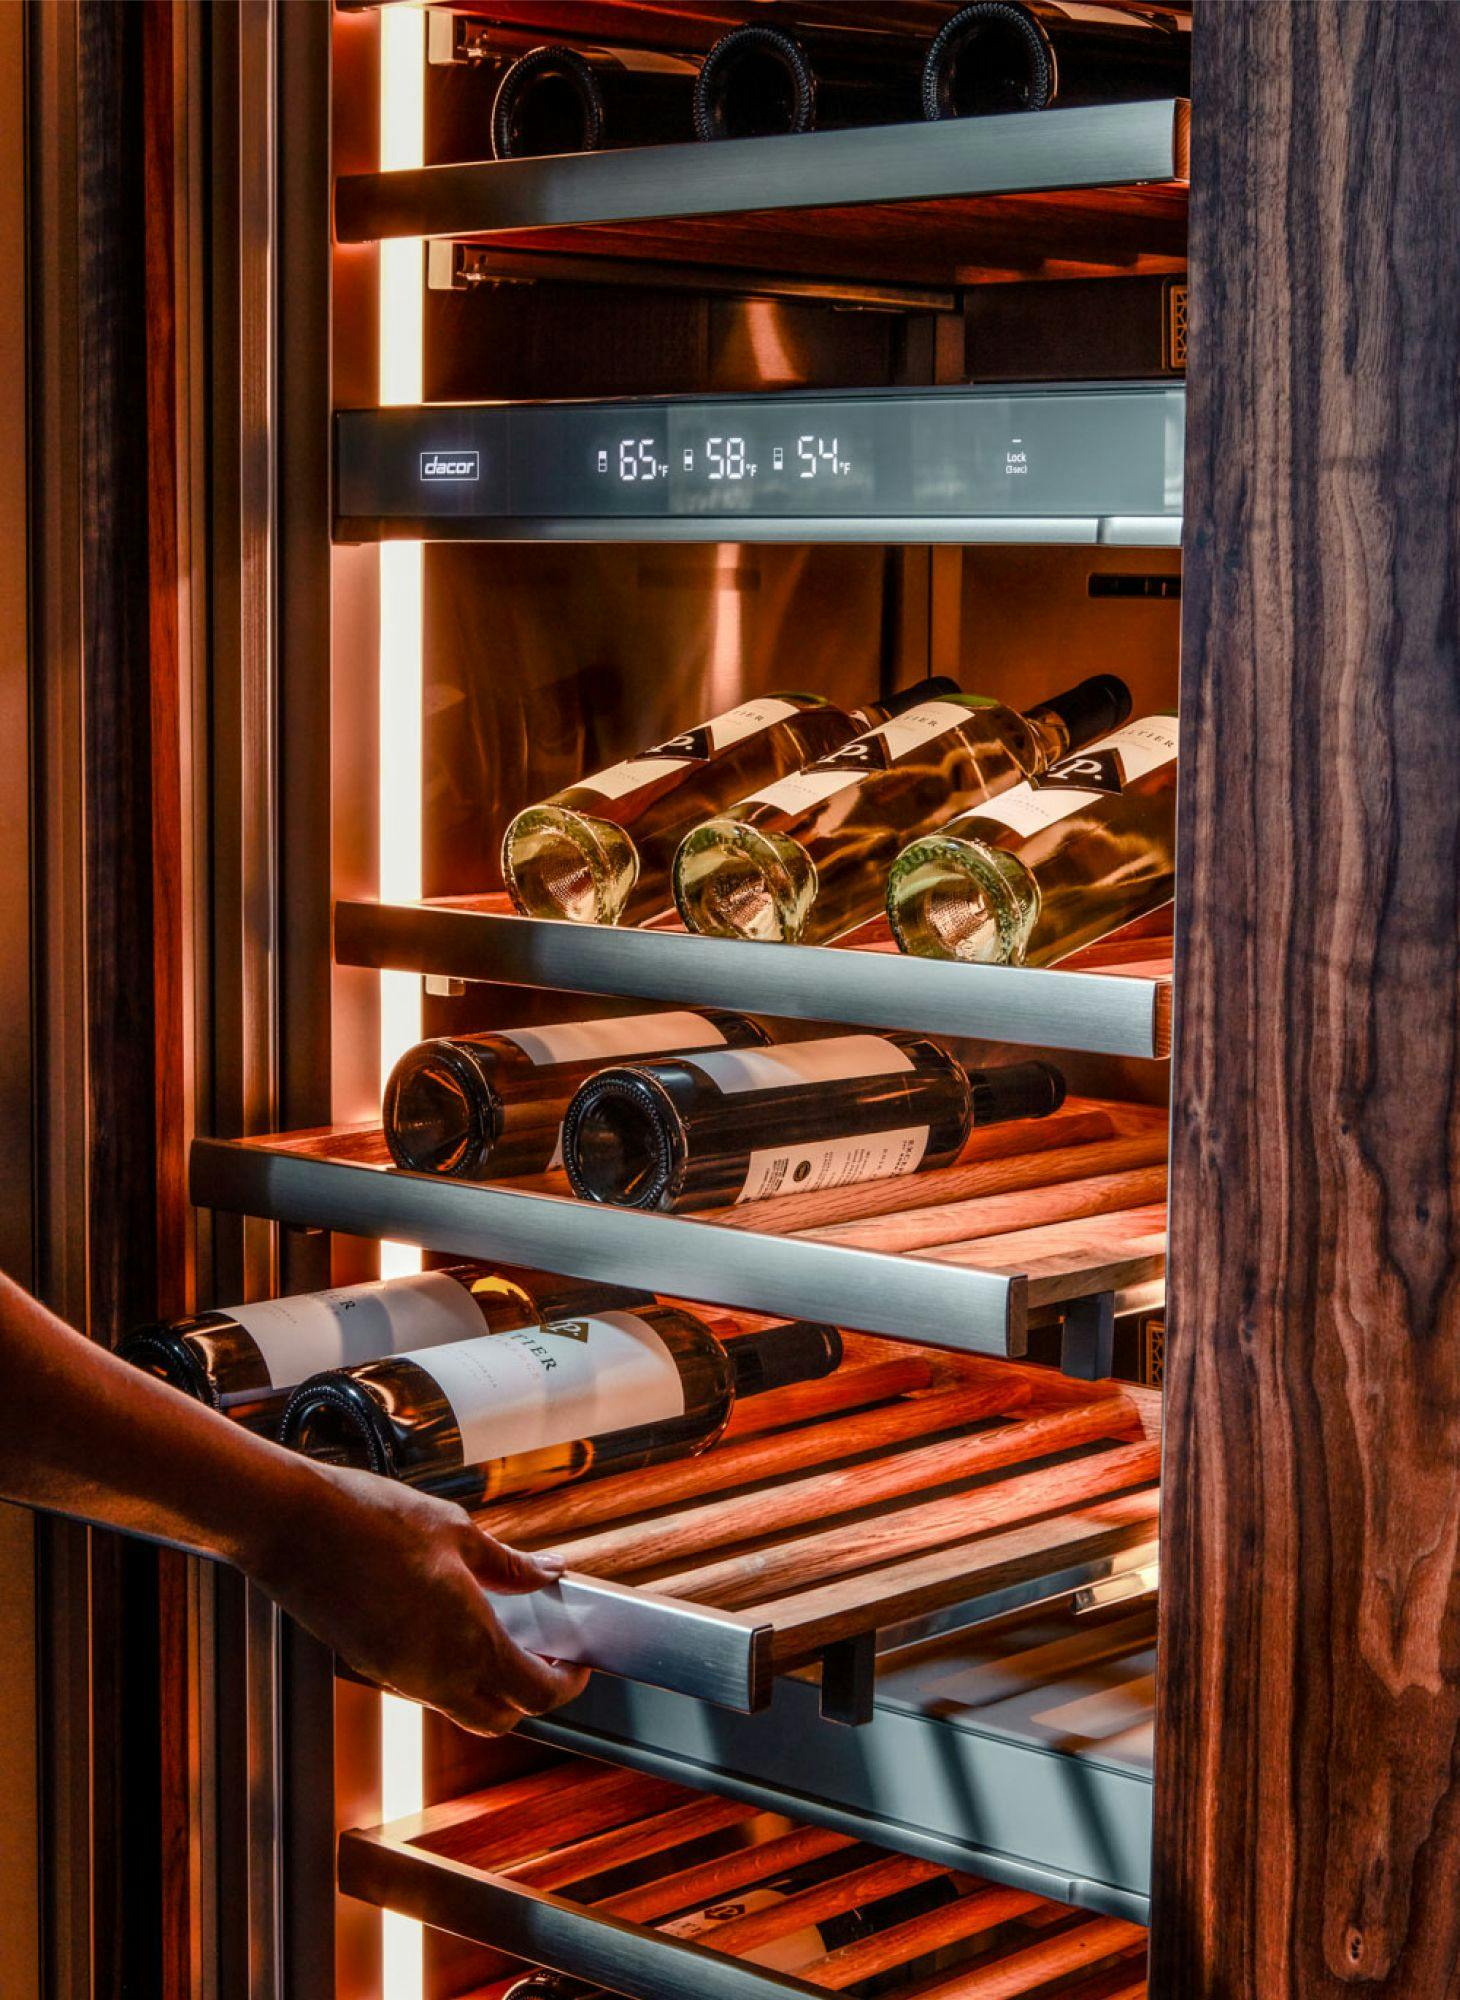 A wine refrigerator with slide out shelves